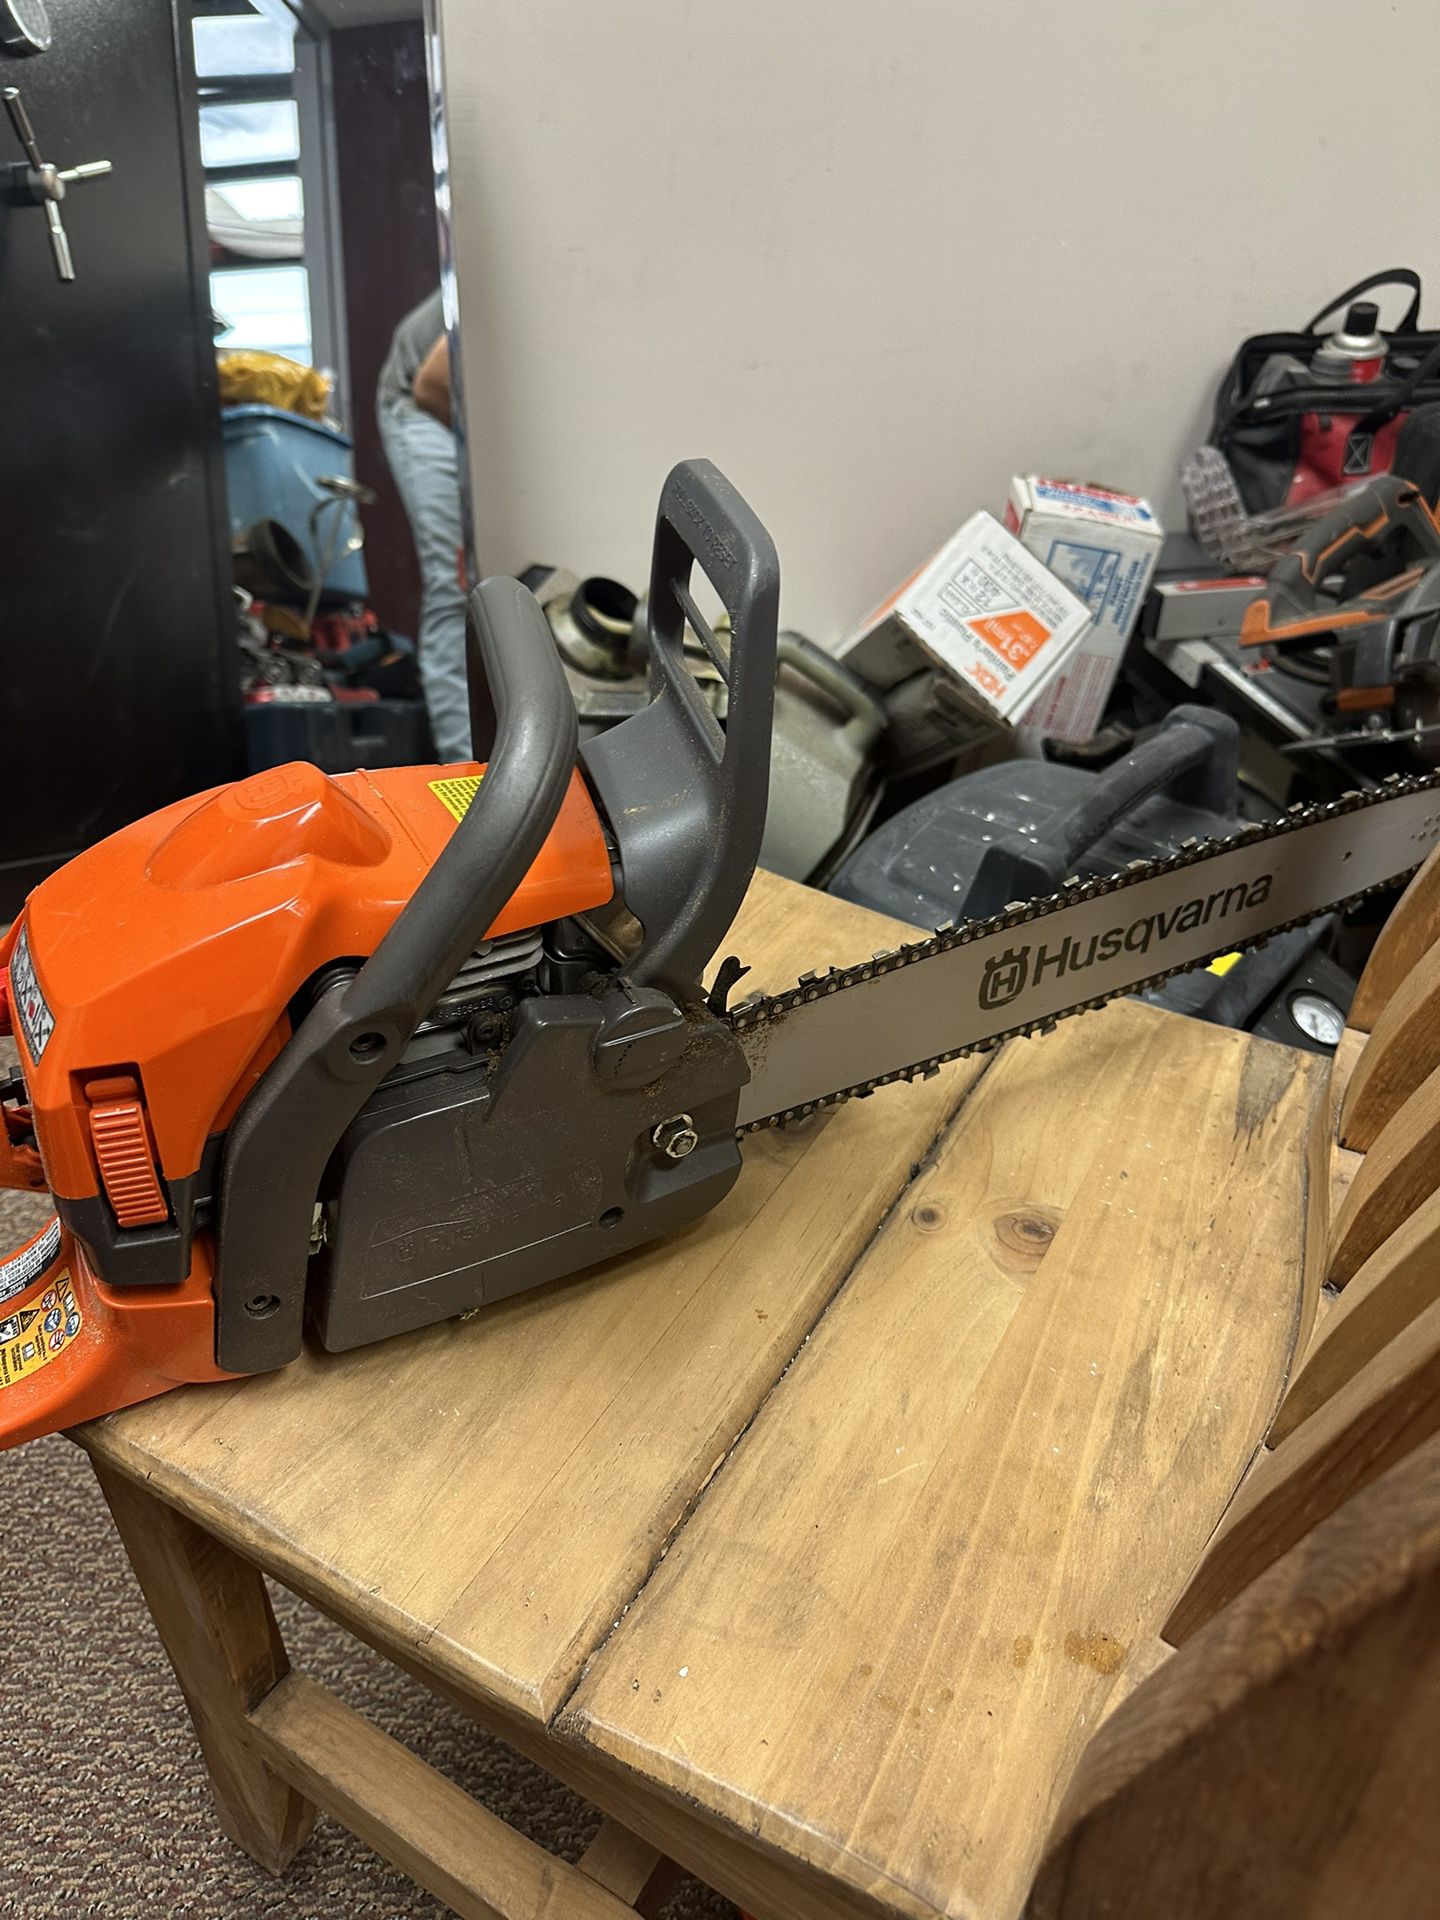 BLACK+DECKER 14 in. 8 Amp Electric Chain Saw for Sale in Houston, TX -  OfferUp